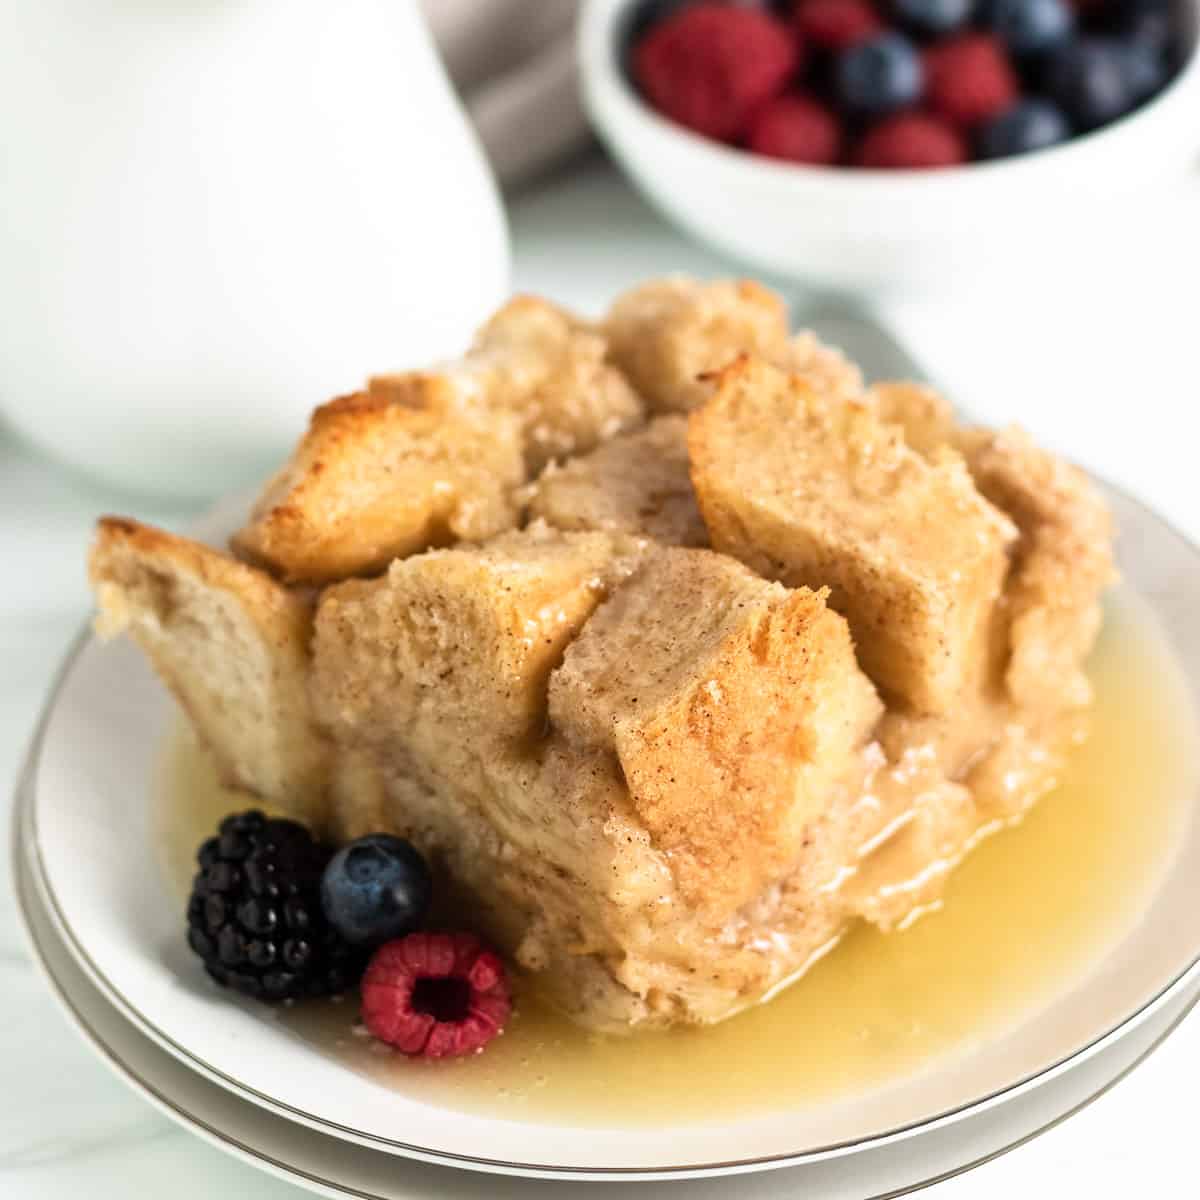 Bread pudding with rum sauce